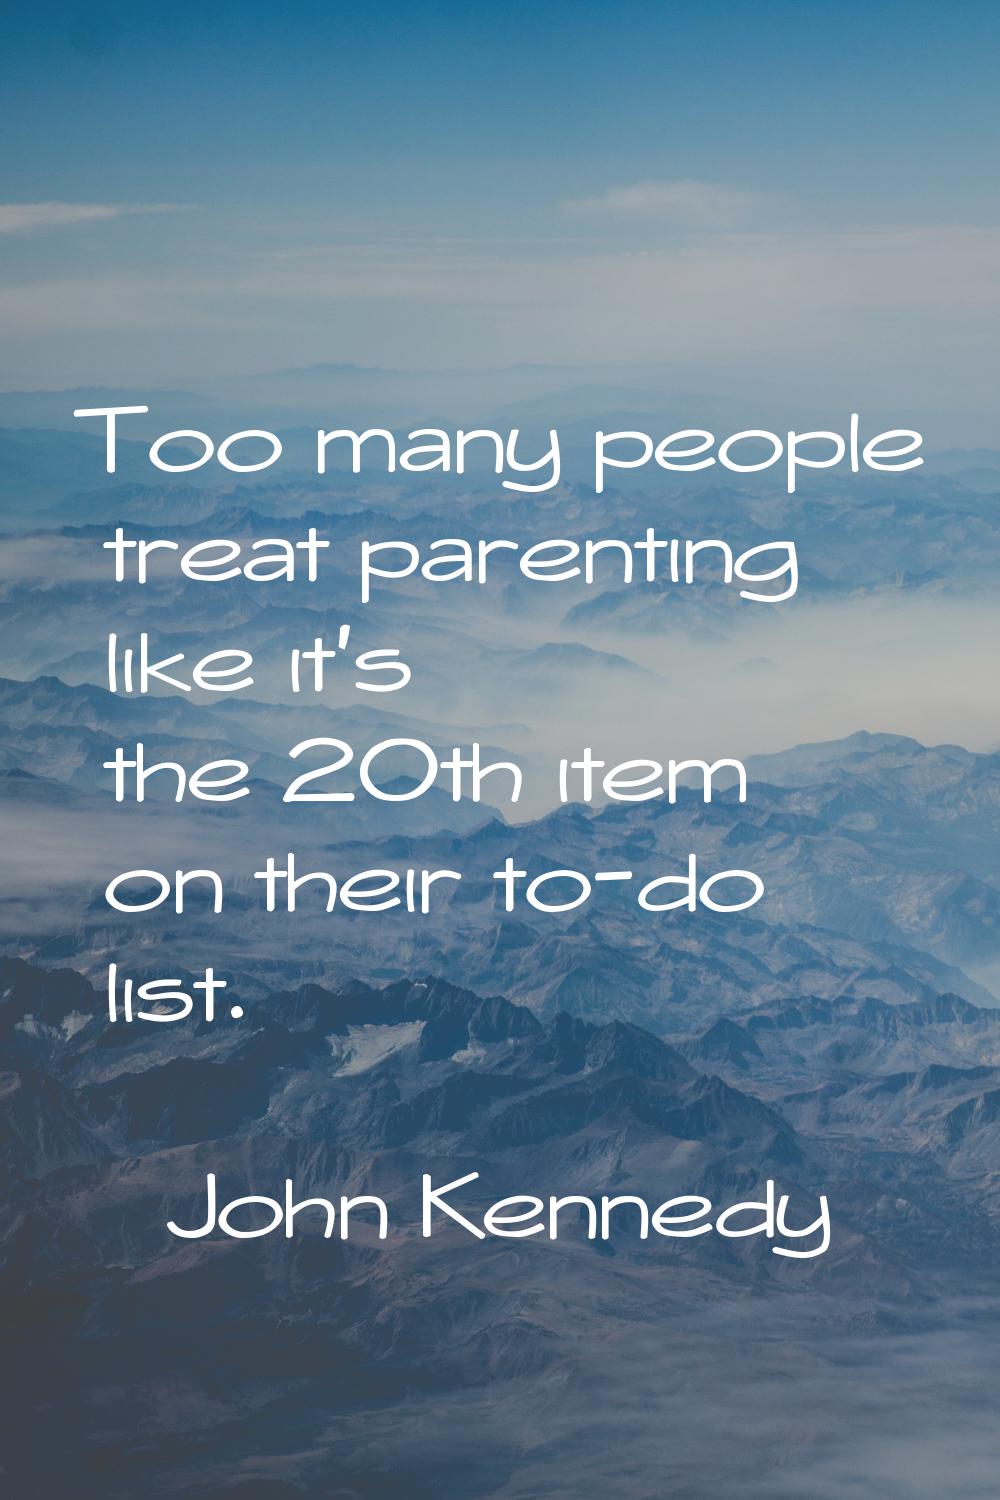 Too many people treat parenting like it's the 20th item on their to-do list.